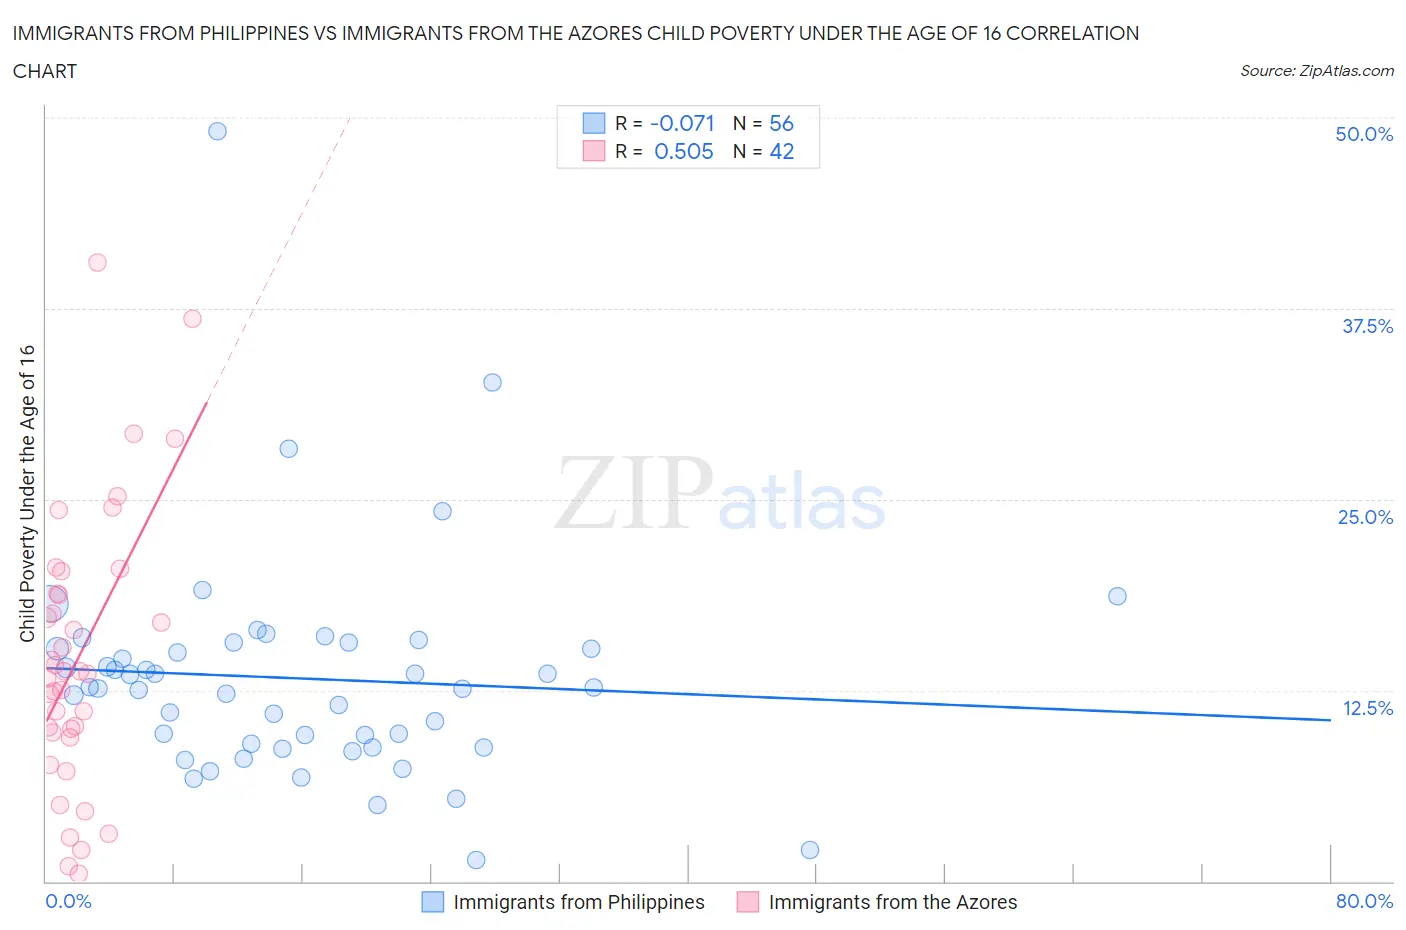 Immigrants from Philippines vs Immigrants from the Azores Child Poverty Under the Age of 16